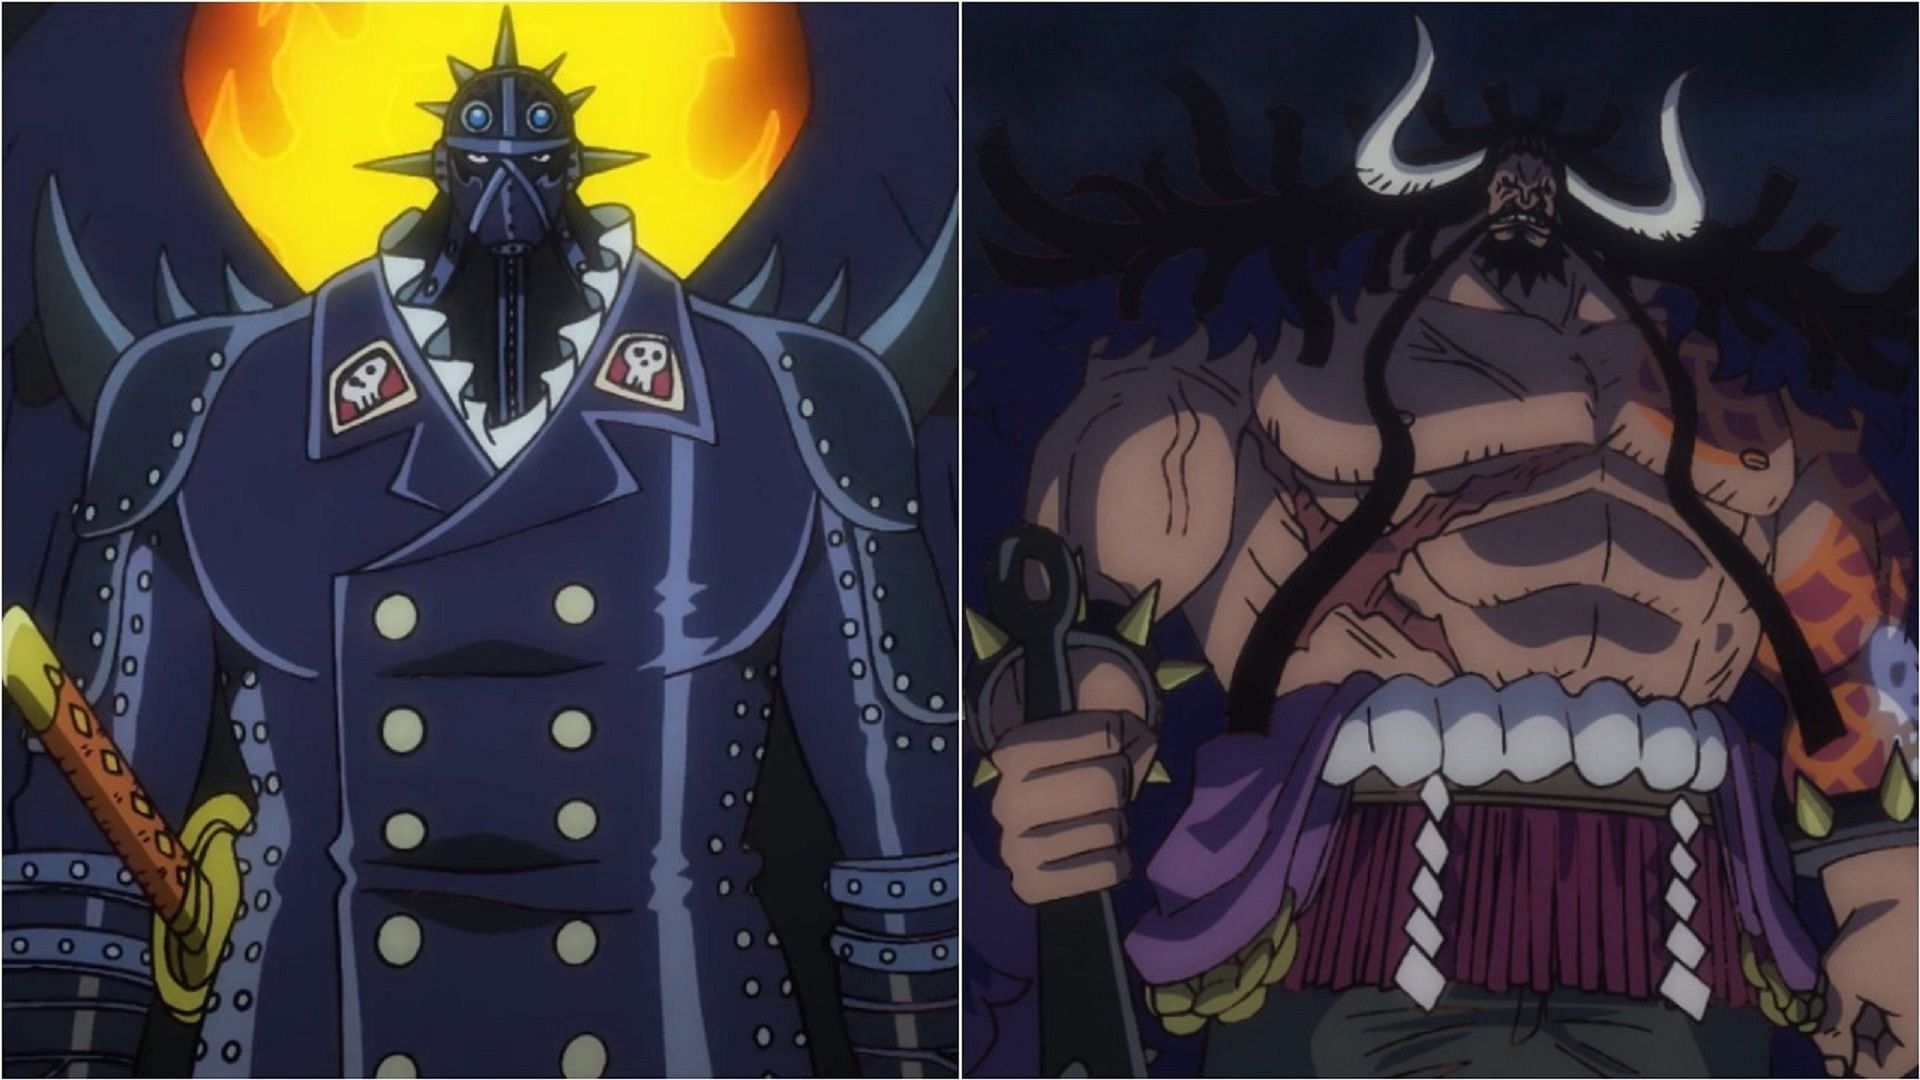 King and Kaido as seen in One Piece (Image via Toei Animation, One Piece)